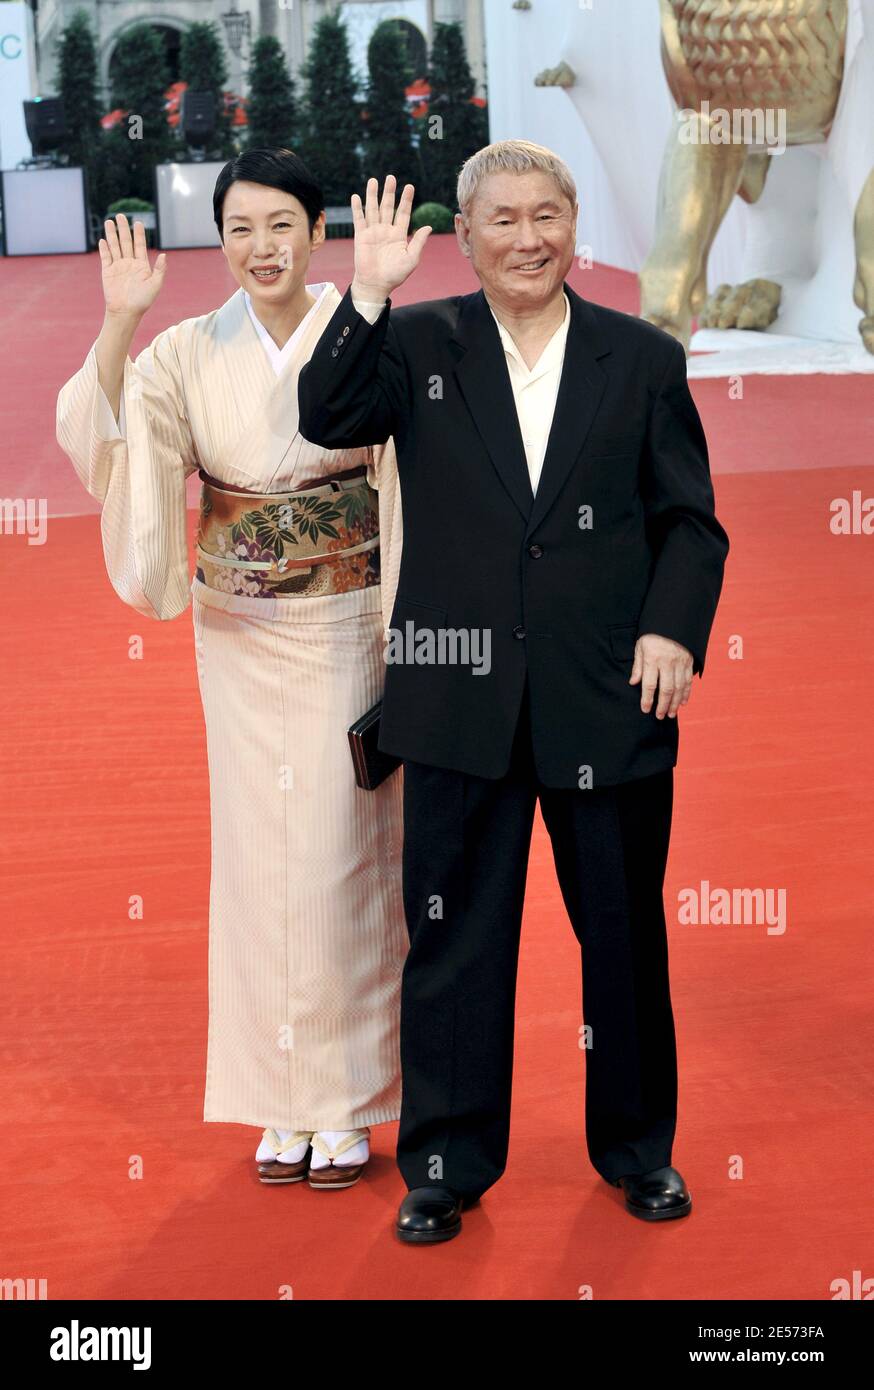 Actress Kanako Higuchi, director Takeshi Kitano arrive at the 'Achilles and the Tortoise' screening during the 65th Mostra Venice Film Festival at Sala Grande in Venice, Italy on August 28, 2008. Photo by Thierry Orban/ABACAPRESS.COM Stock Photo